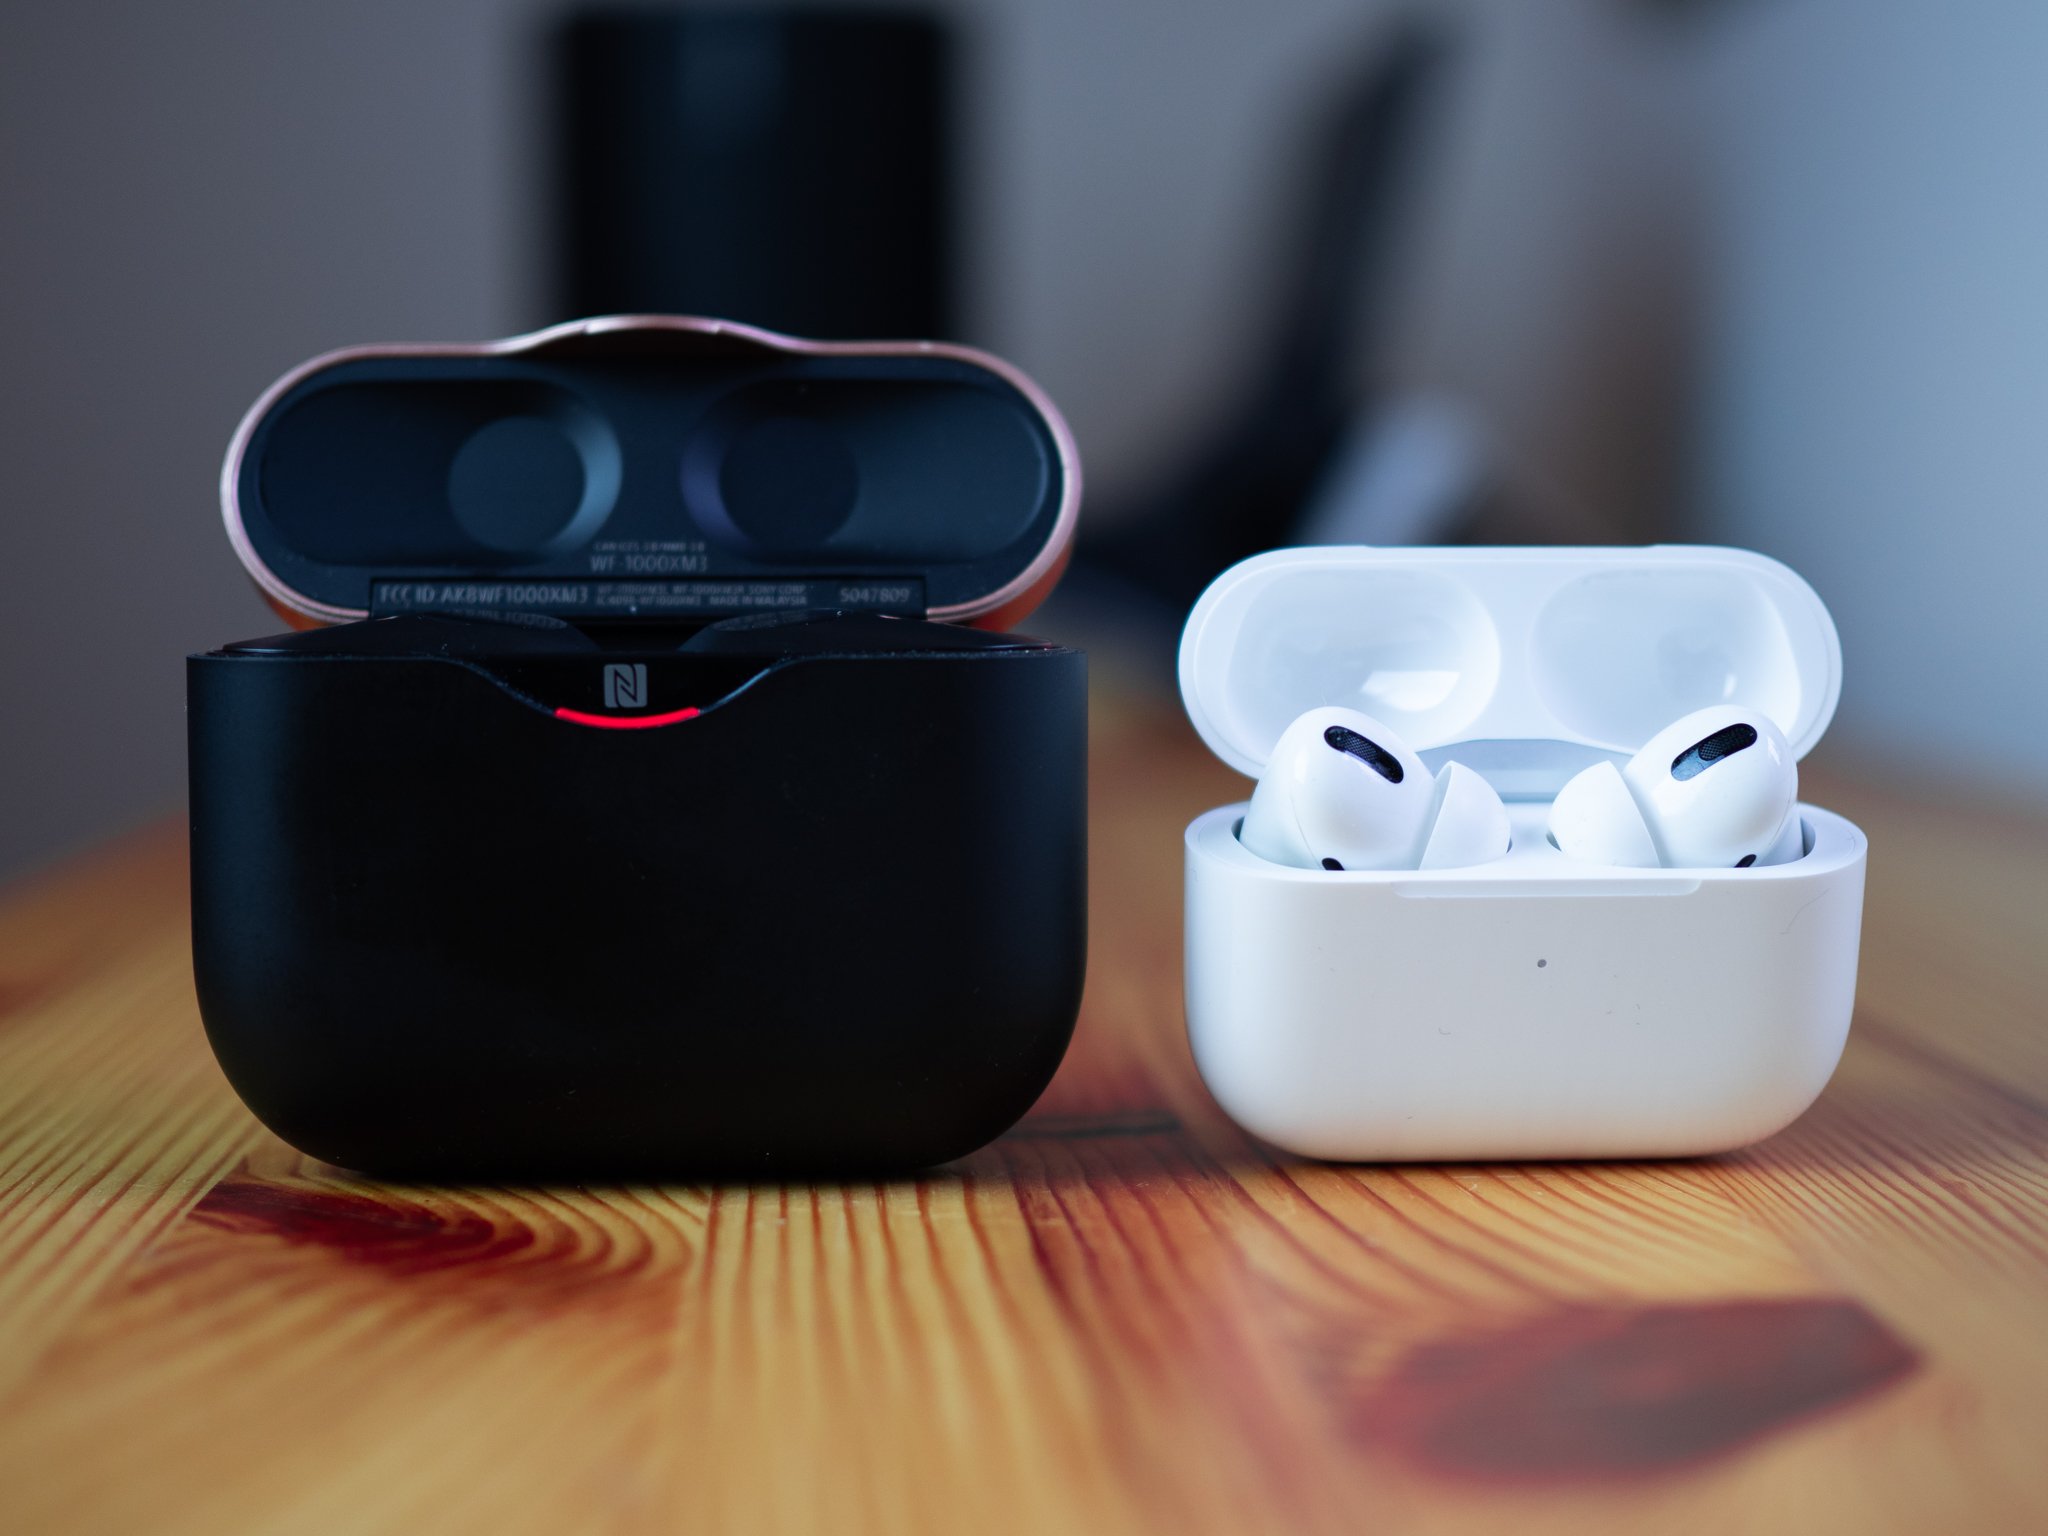 Airpods pro huilian. Apple AIRPODS Pro. Sony AIRPODS. AIRPODS Pro 3. Беспроводные наушники AIRPODS Pro Premium.